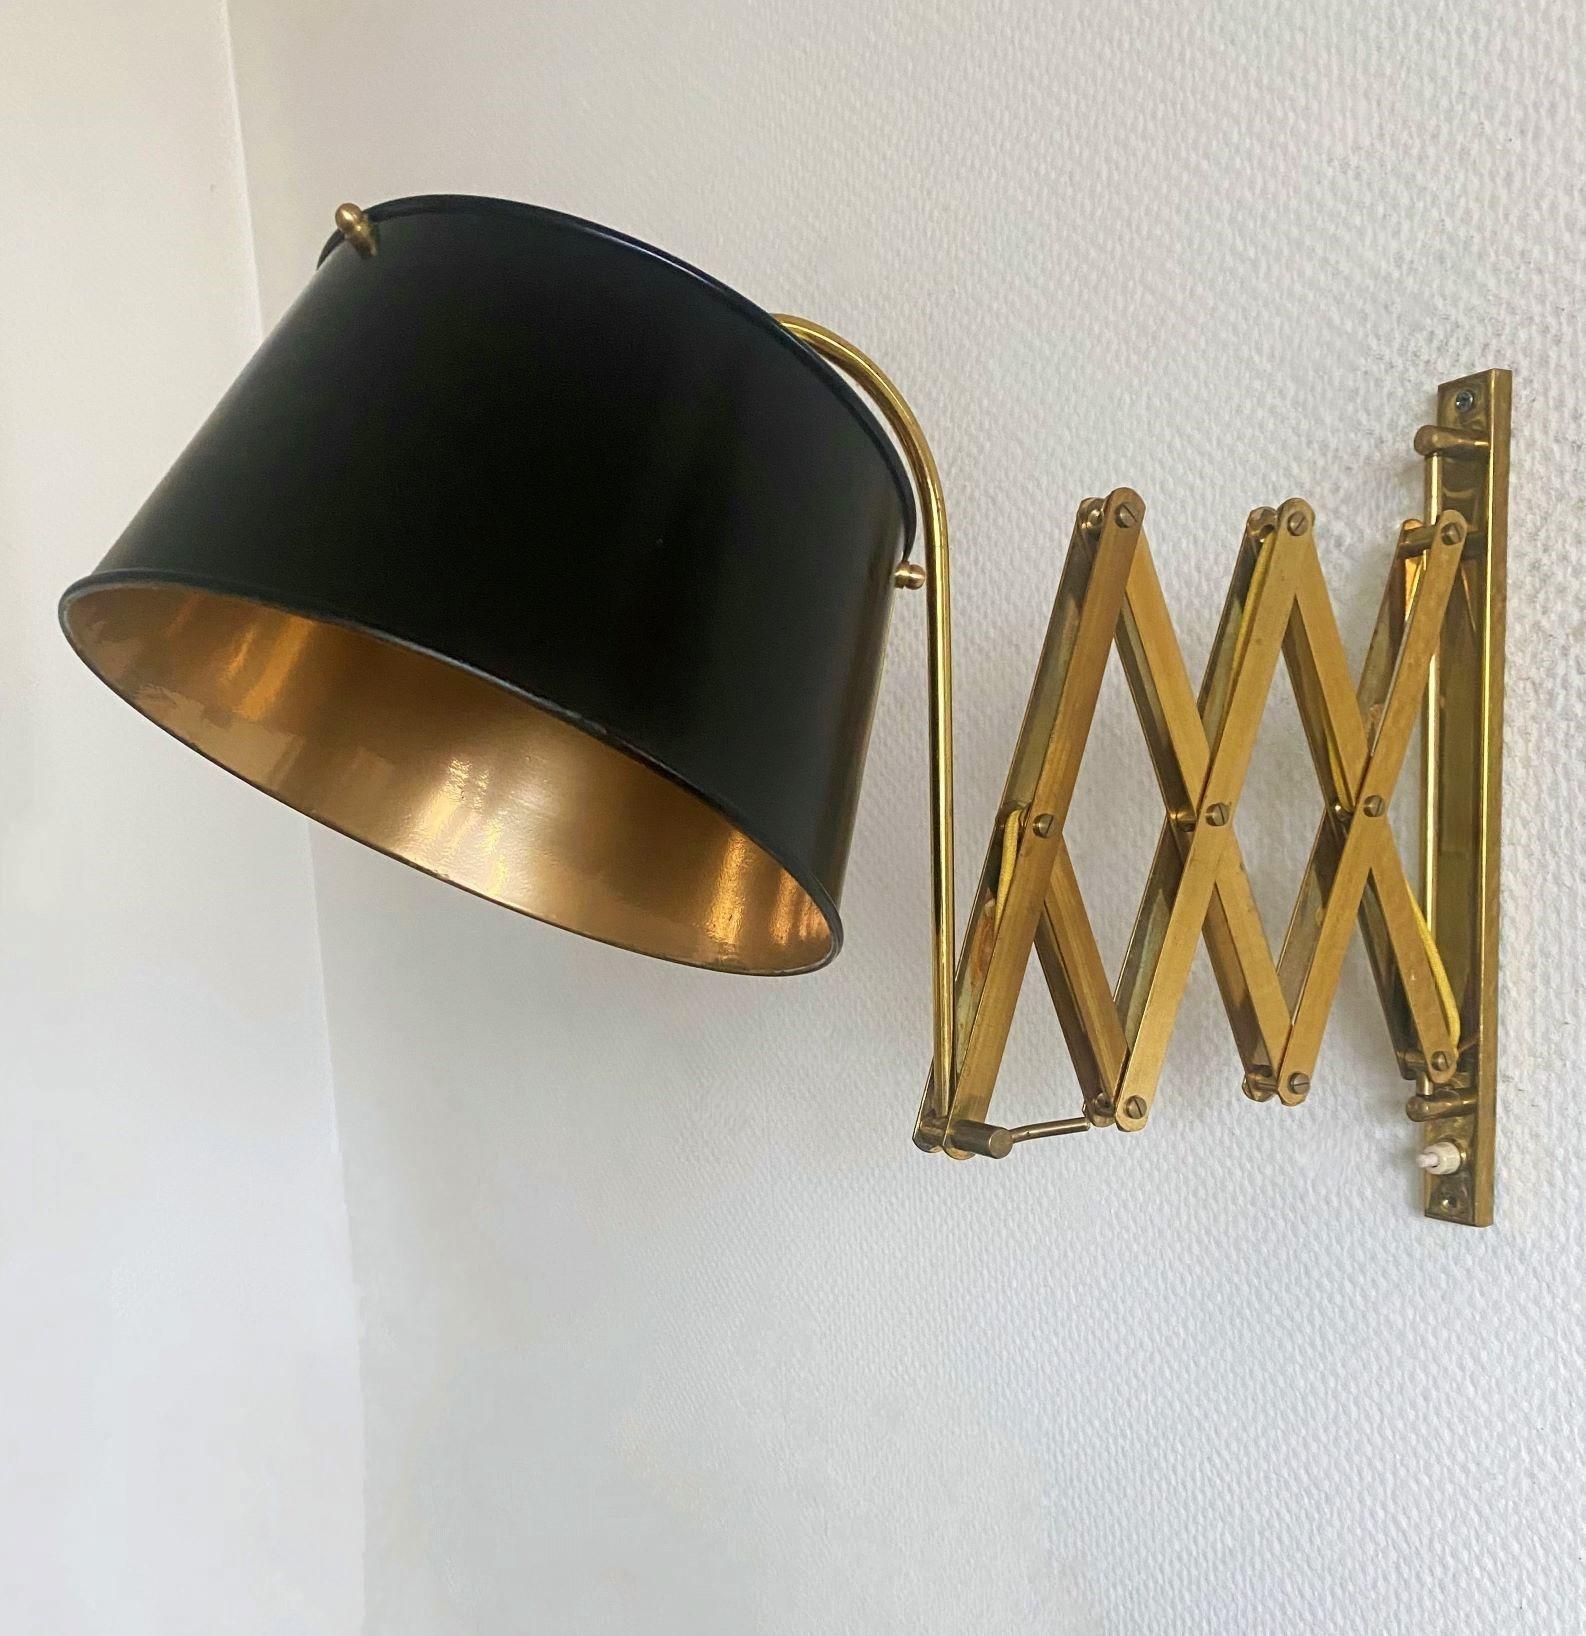 Midcentury Italian Adjustable Brass Wall Sconce with Black Lacquered Metal Shade In Good Condition For Sale In Frankfurt am Main, DE